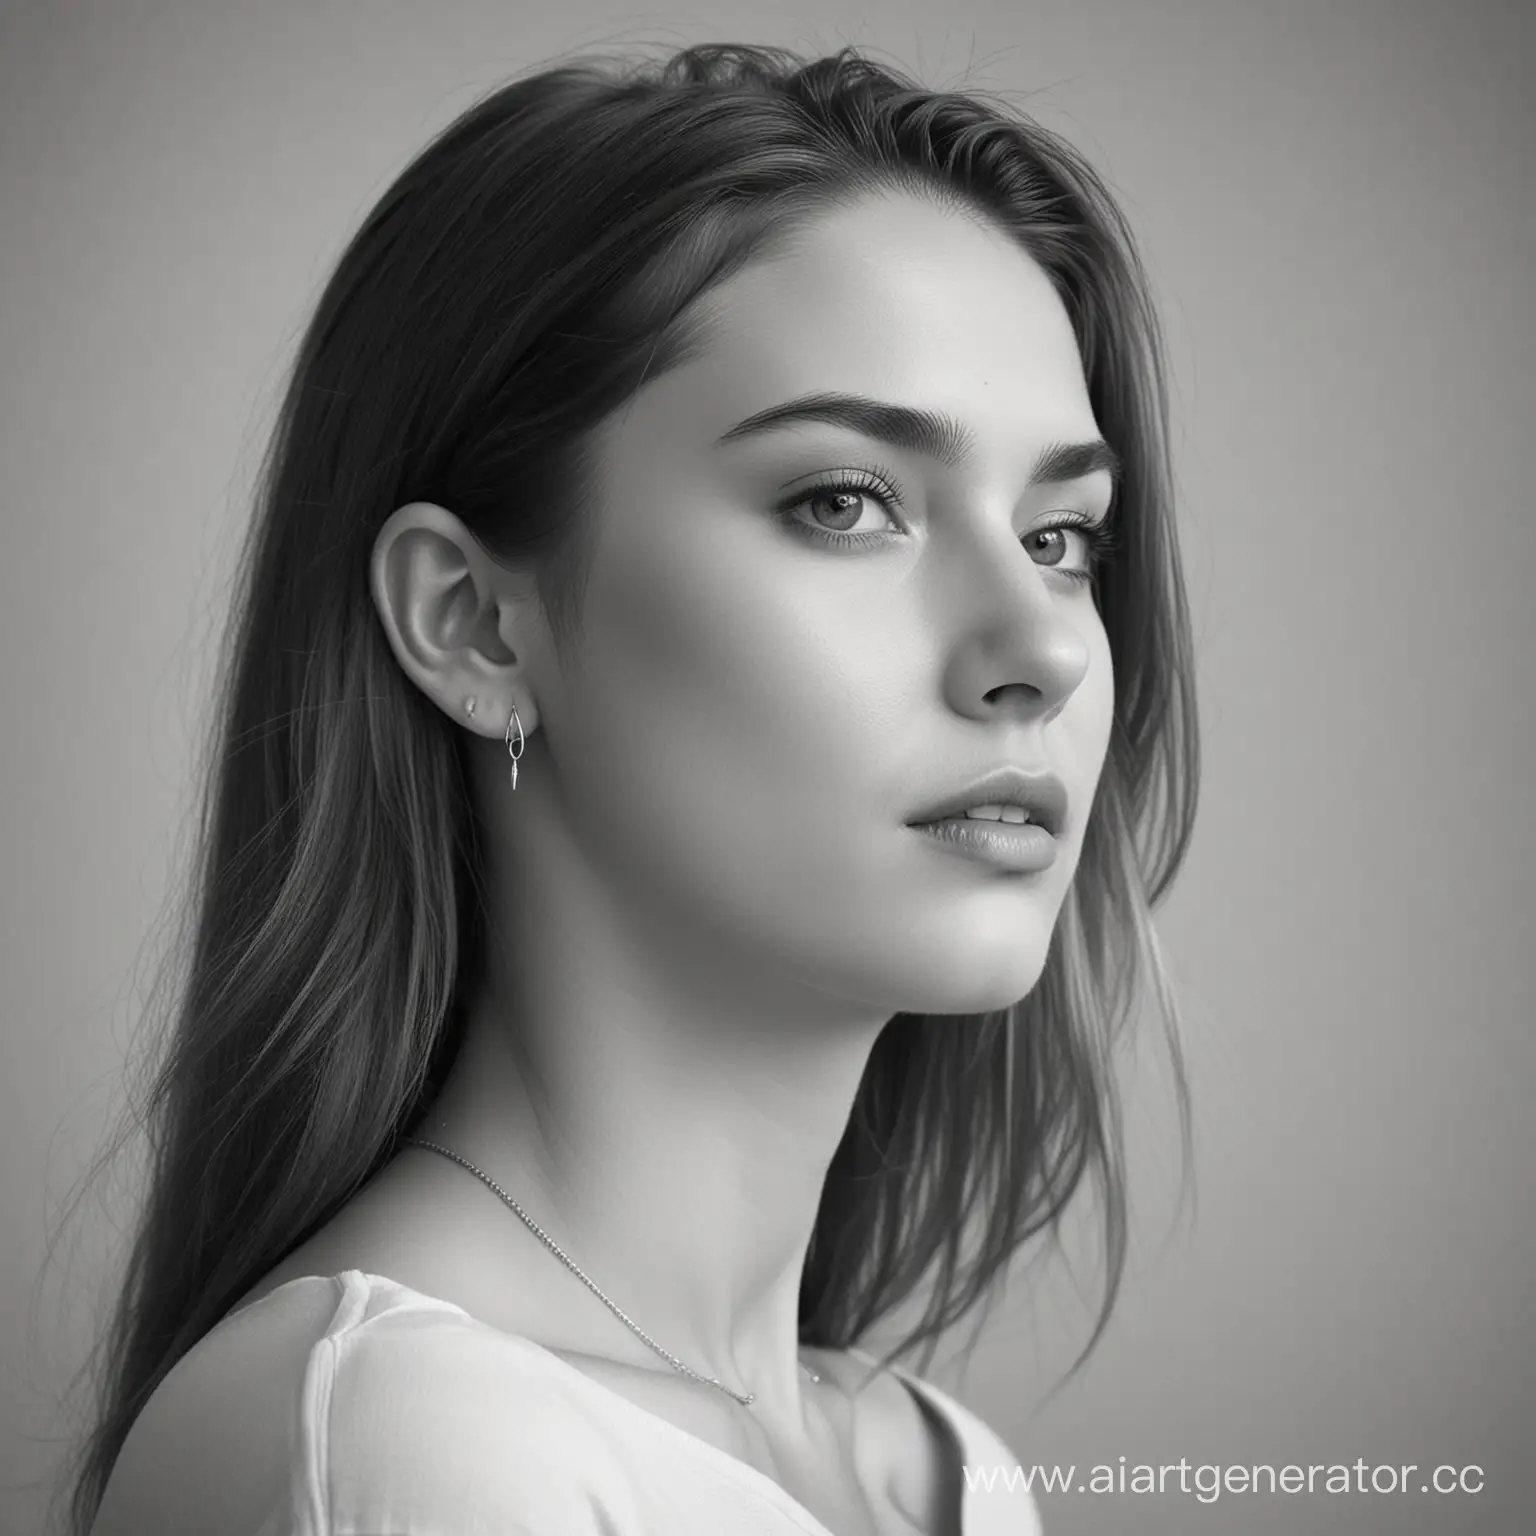 Minimalist-Black-and-White-Portrait-of-a-Girl-with-Silver-Earrings